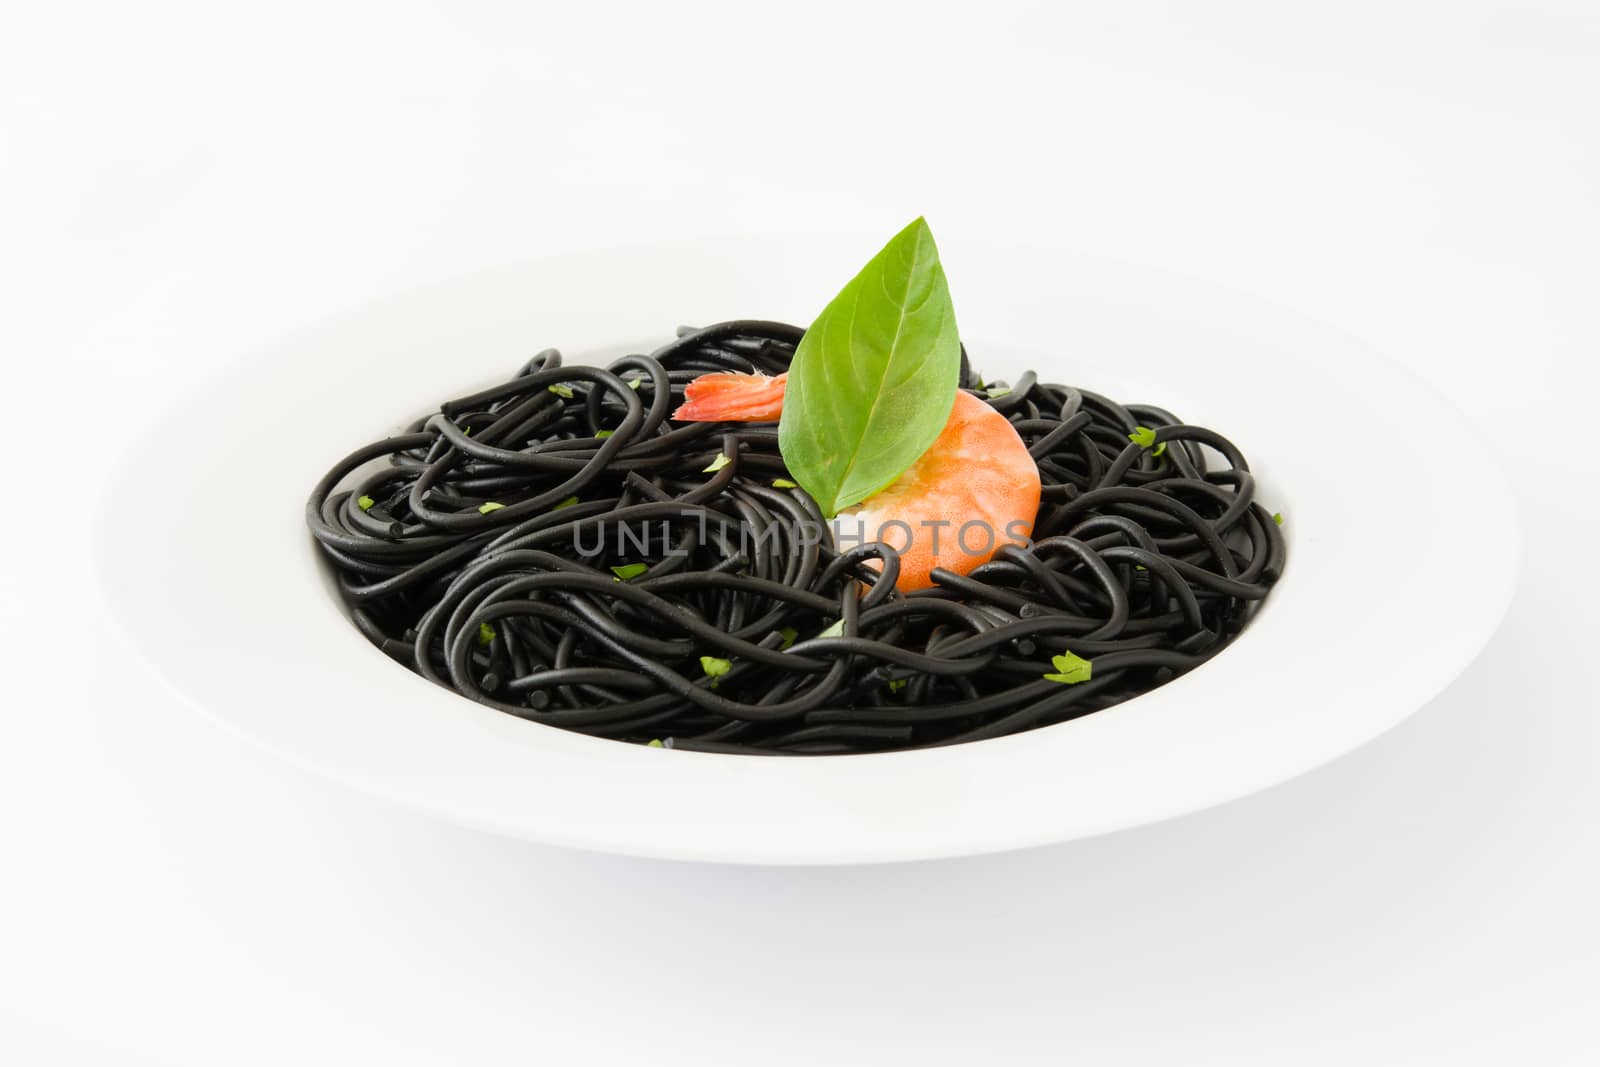 Black spaghetti with prawns and basil isolated on white background